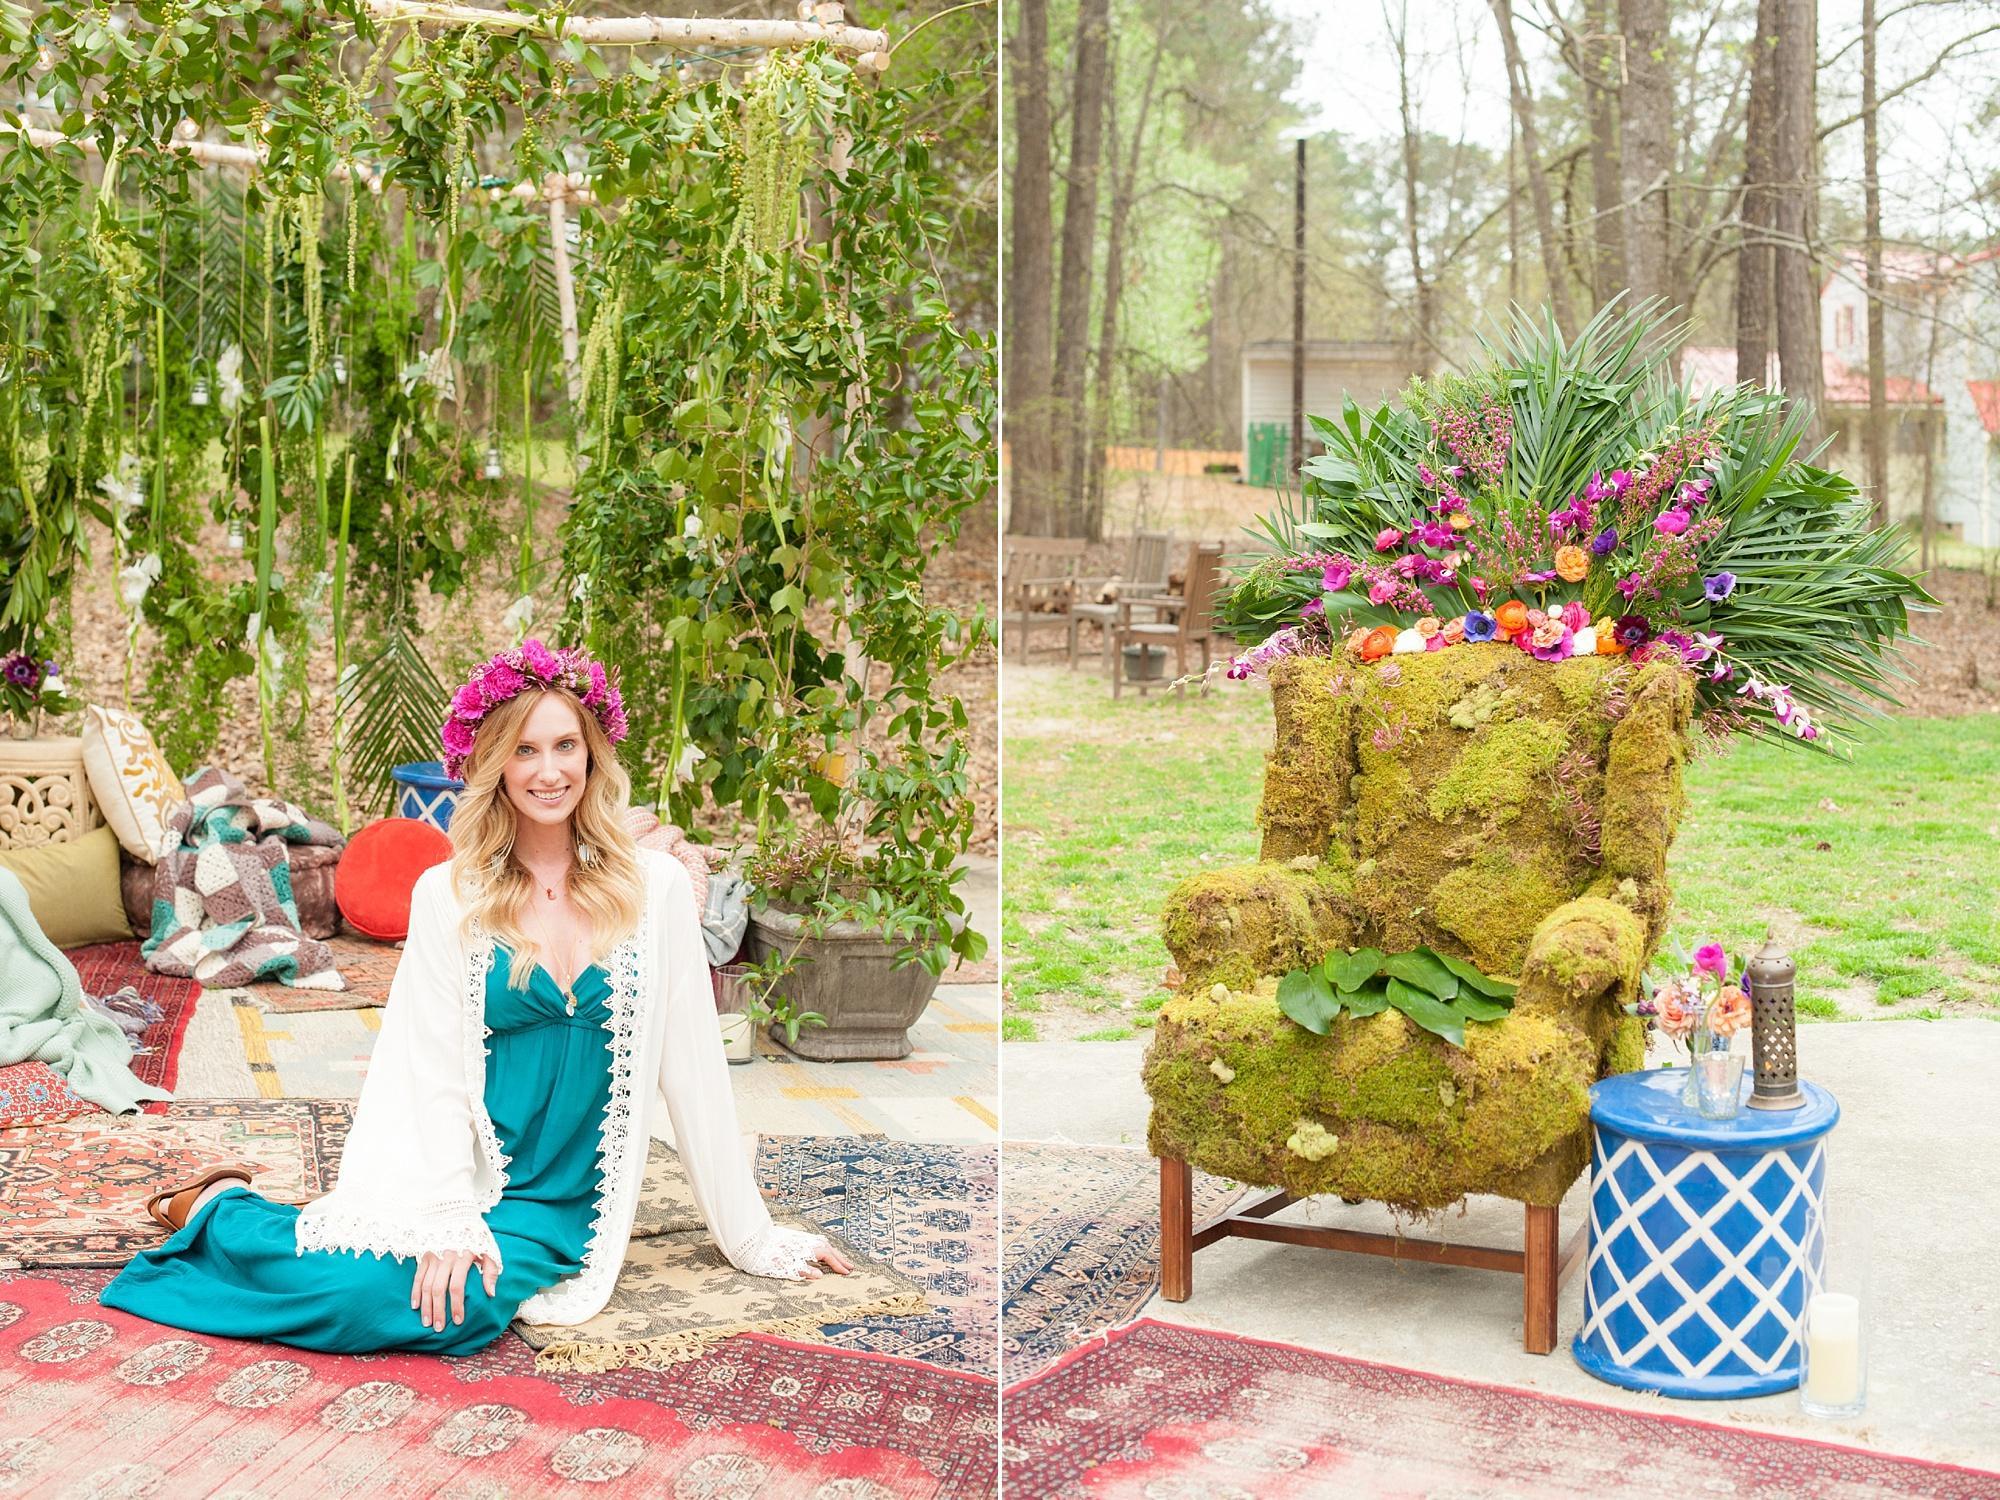 Enchanted garden birthday photos with moss throne and floral nook. Images by Mikkel Paige Photography, Raleigh wedding photographer, flowers by Meristem Floral.